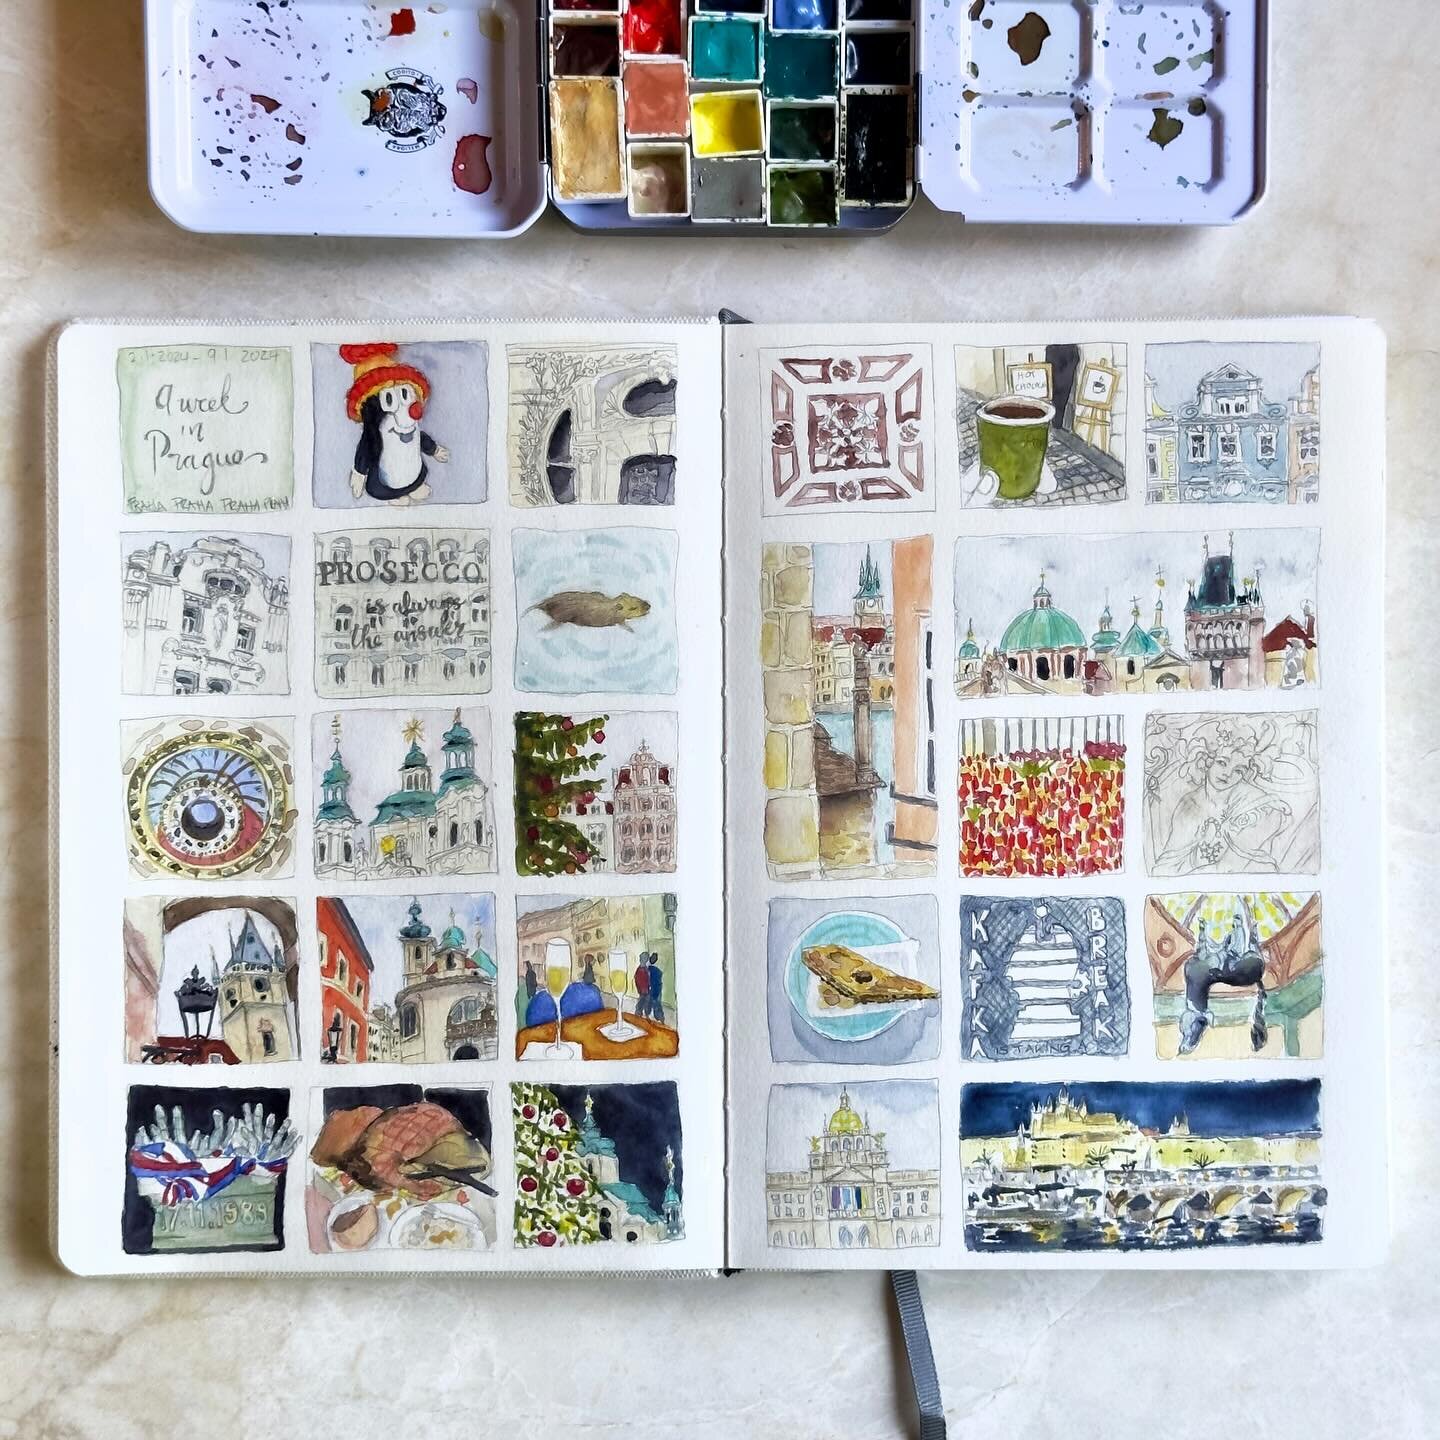 The first stop on our adventures was Prague. Here&rsquo;s a peek at some of what we got up to in the first few days - a page from my travel sketchbook.
#travelvignettesworkshop